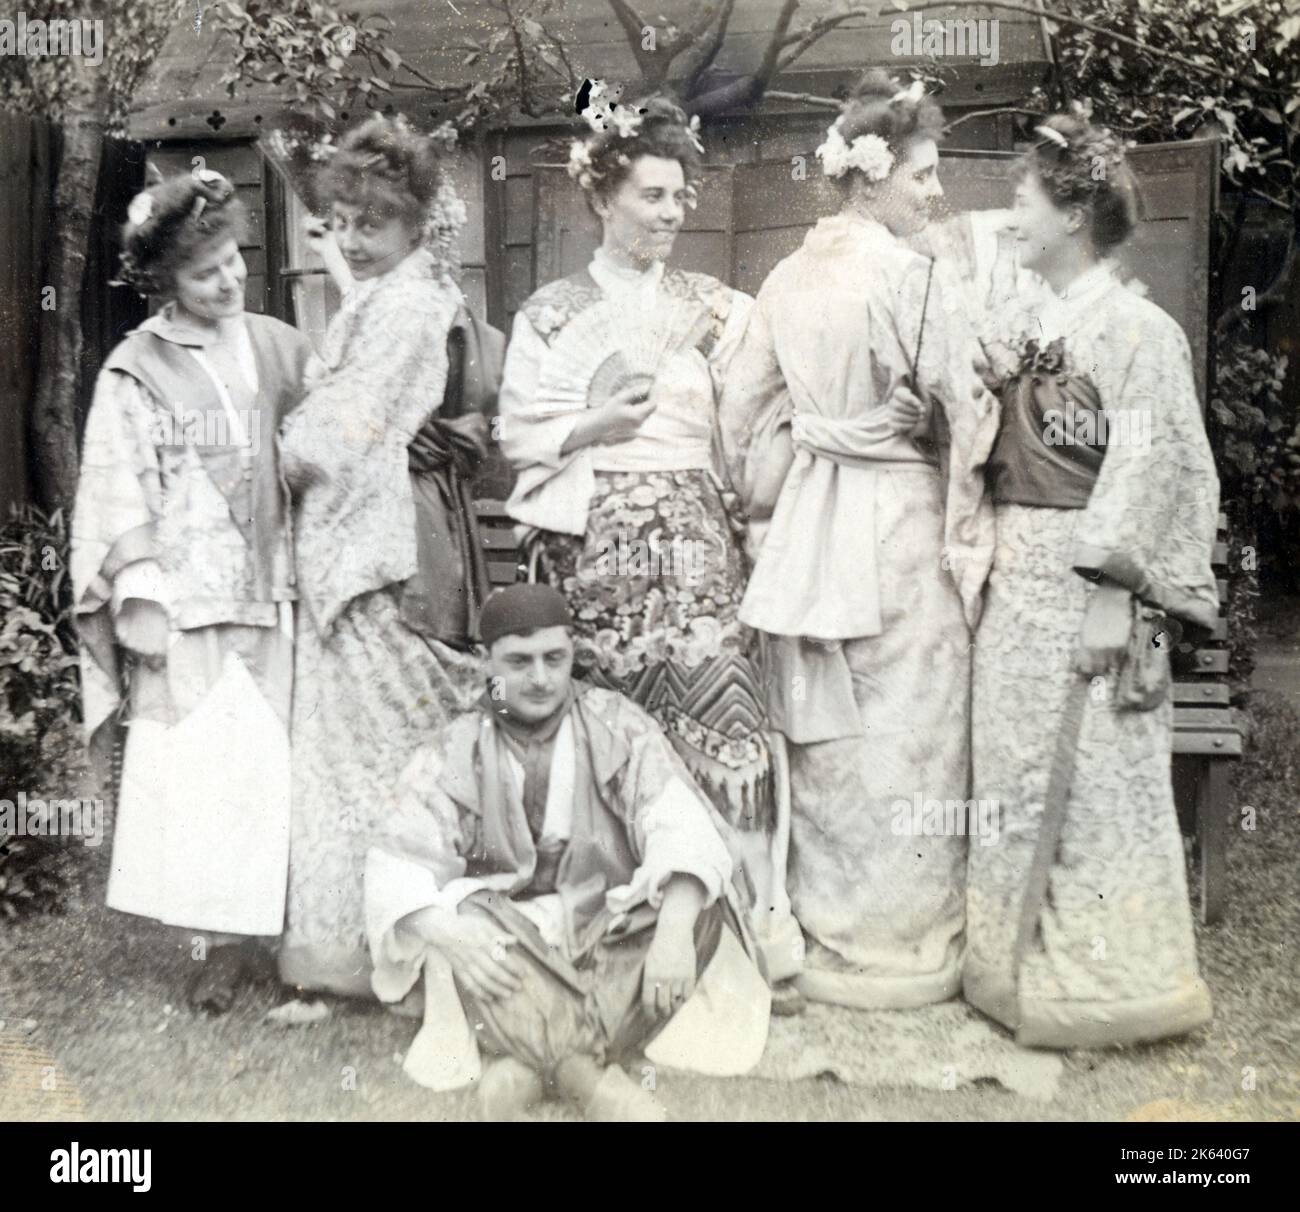 A group of 1920s men and women in fancy dress - all wearing pseudio-Japanese attire. Stock Photo